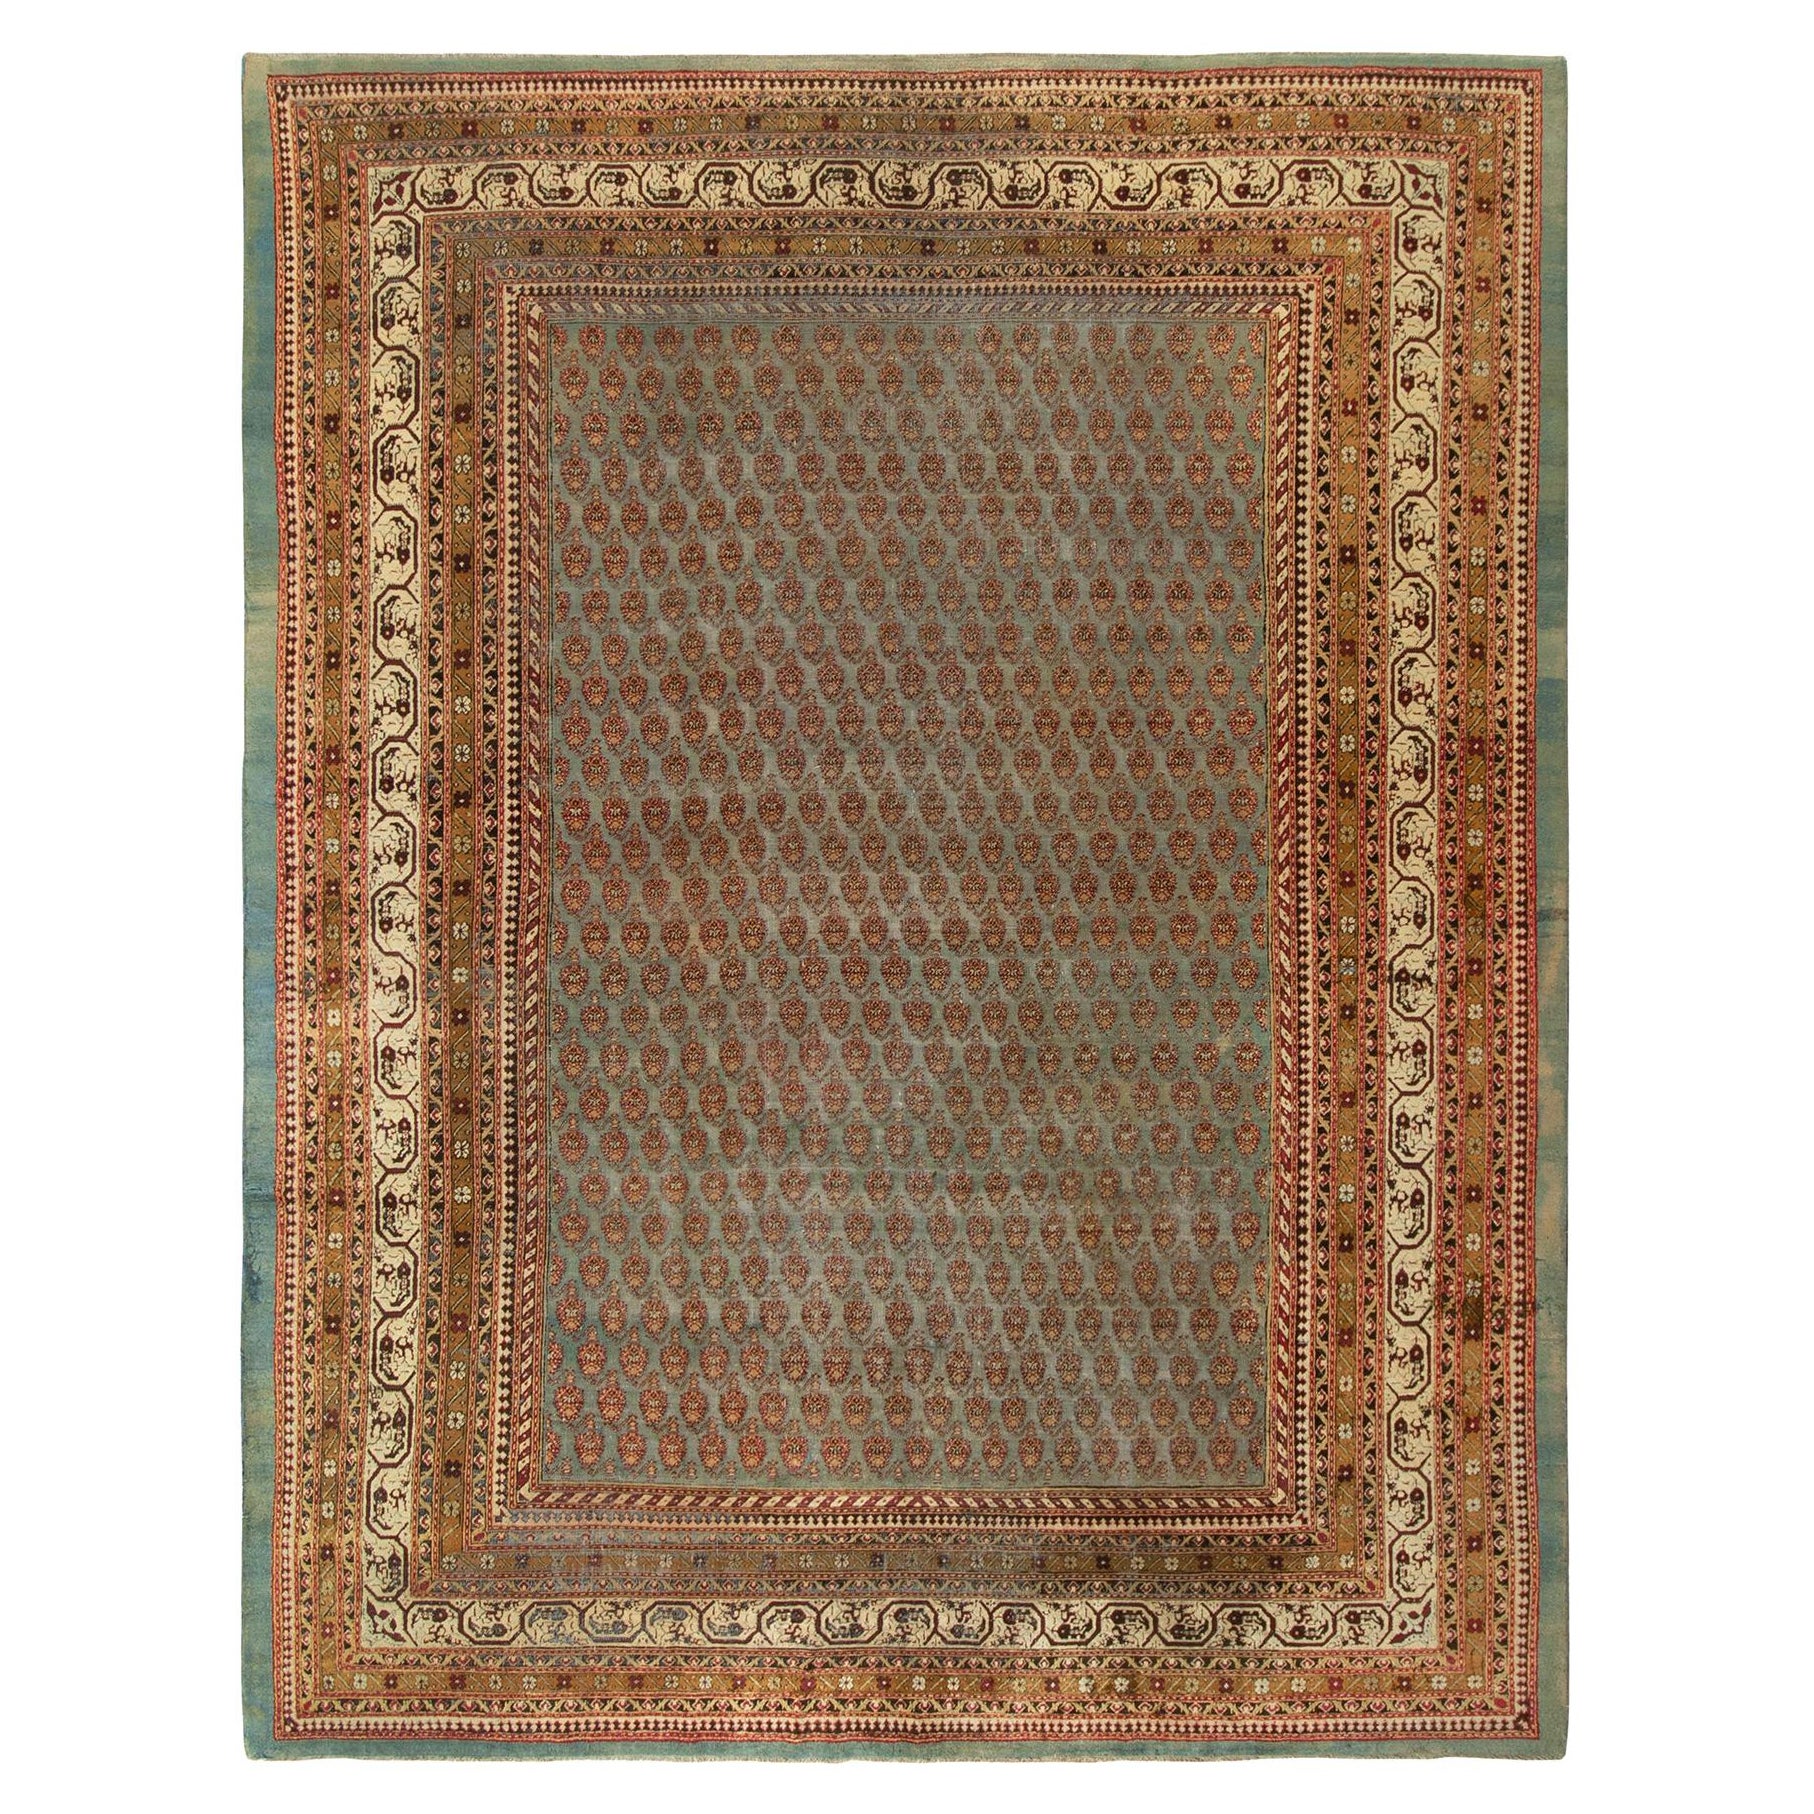 Hand-Knotted Antique Amritsar Rug in Turquoise, Gold, Red Paisley Pattern